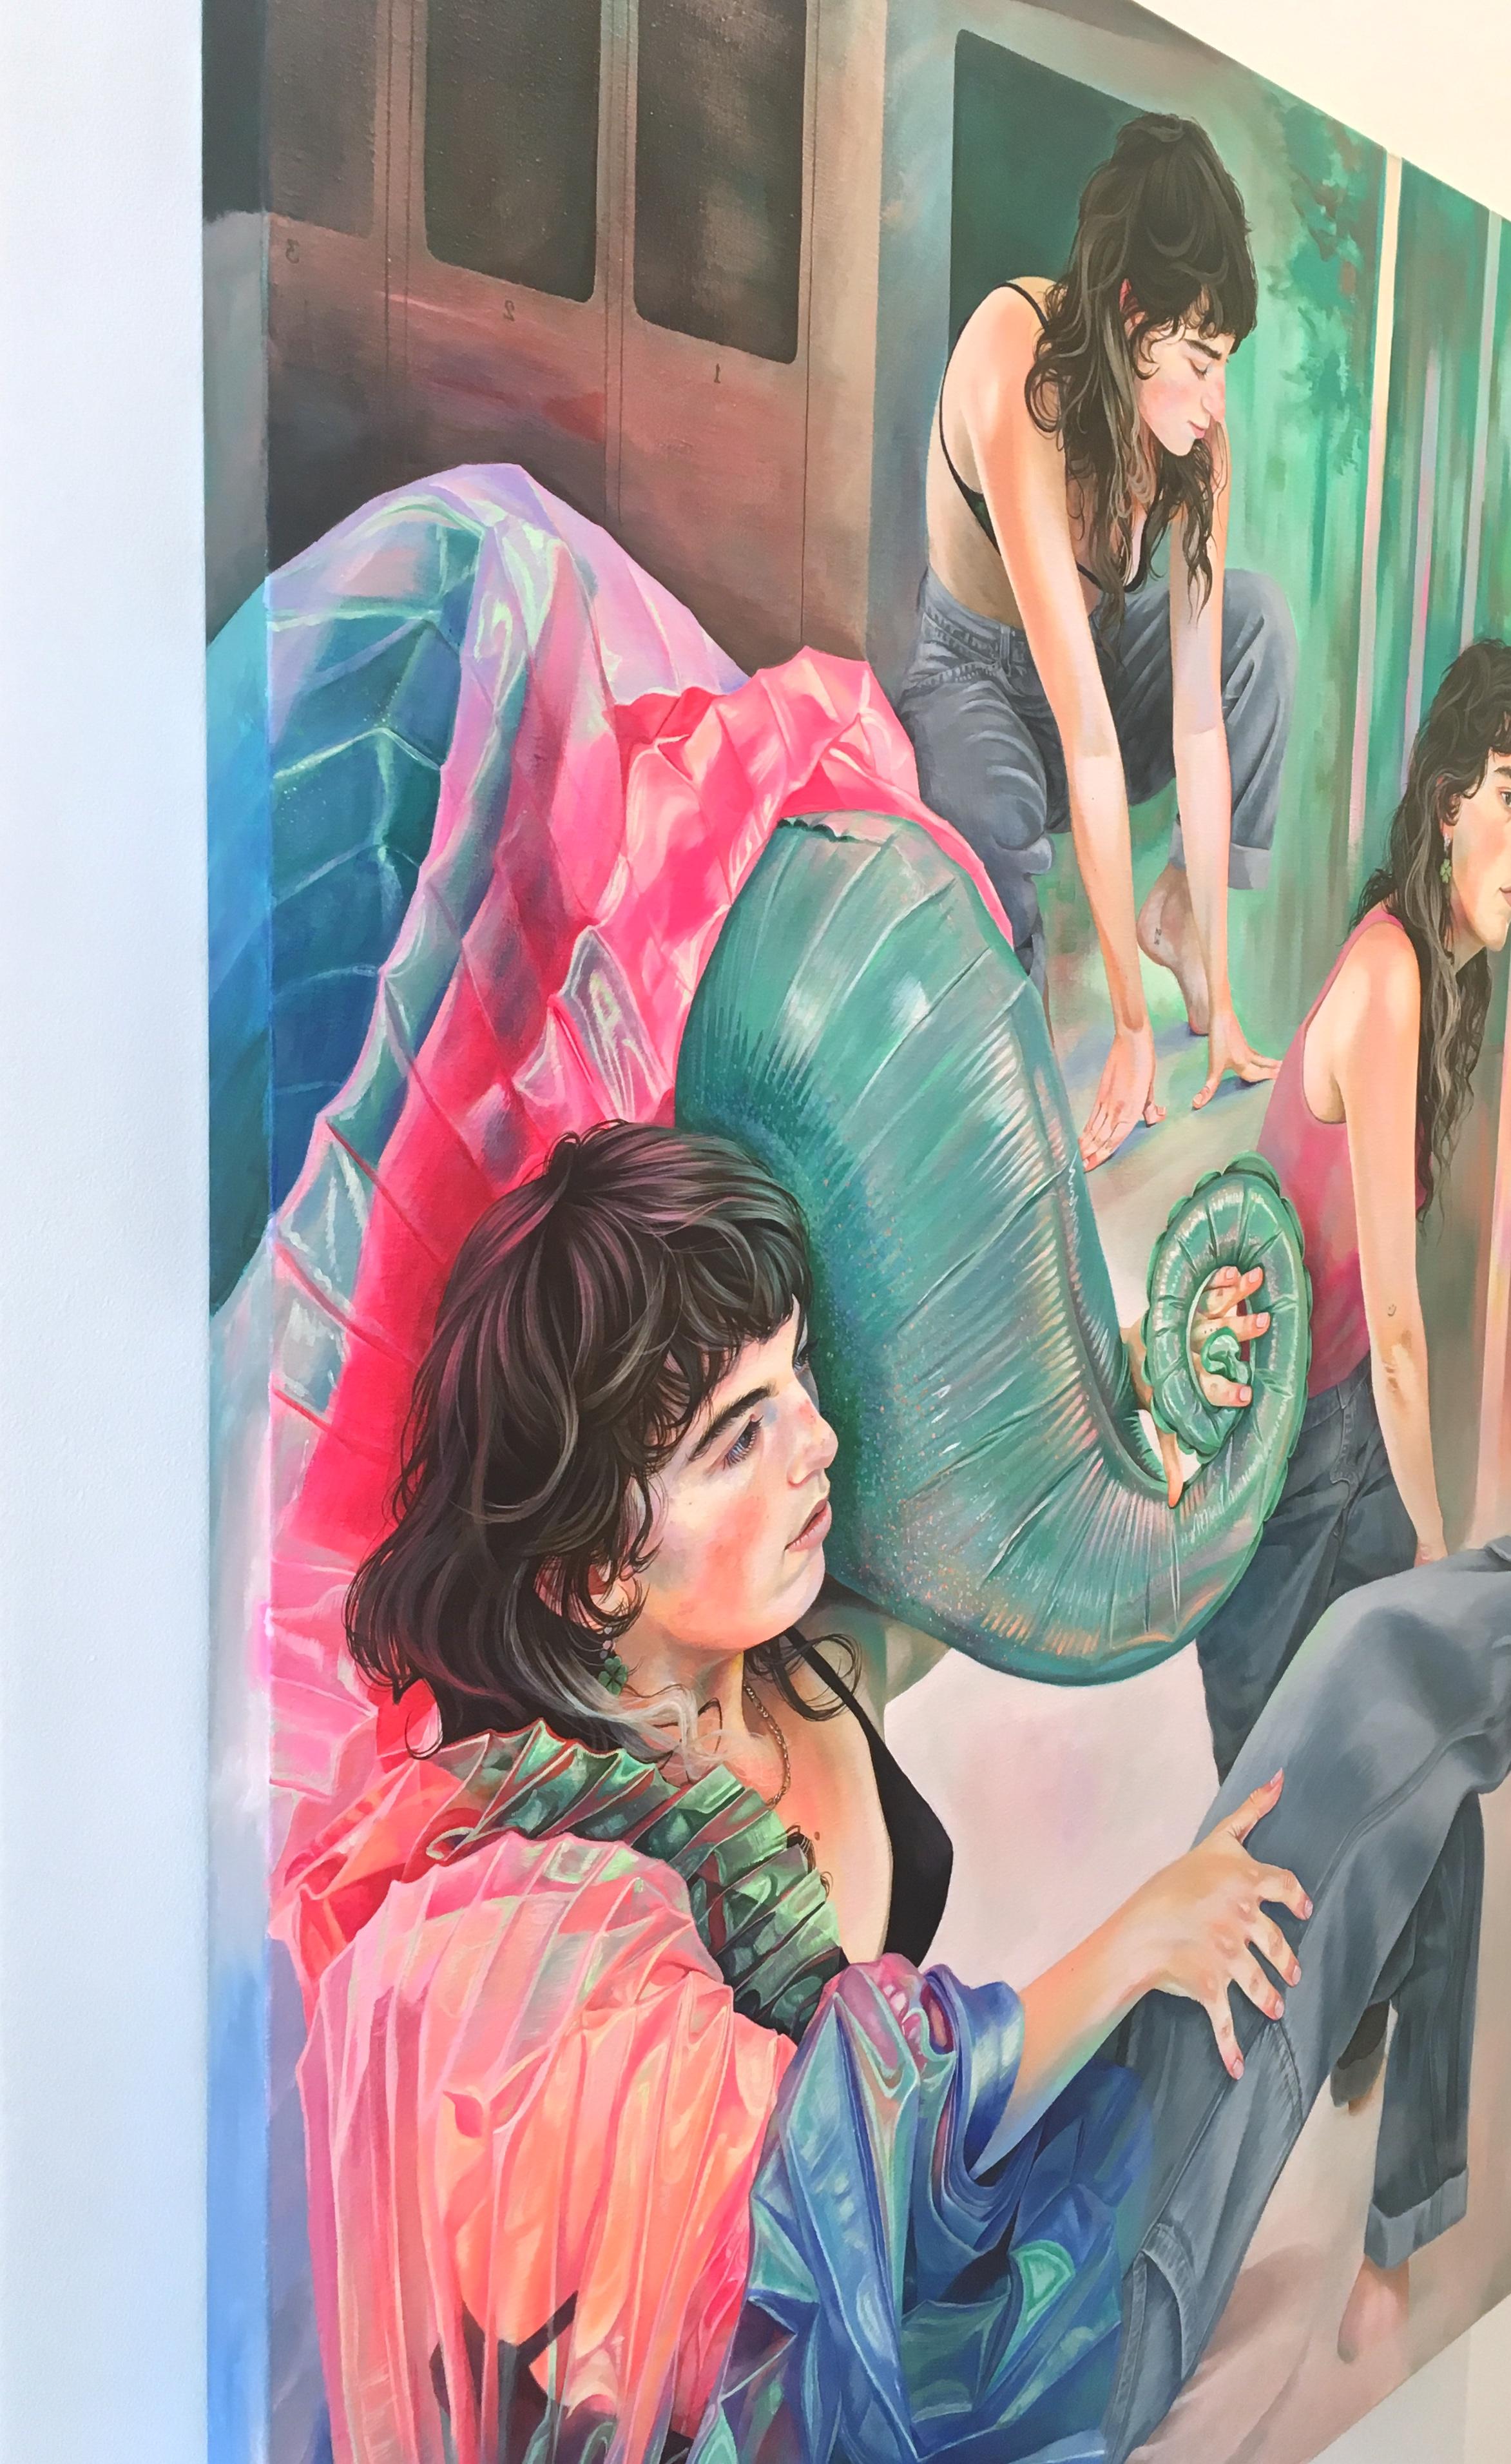 The Magic Statues, acrylic on linen  - Blue Portrait Painting by Martine Johanna